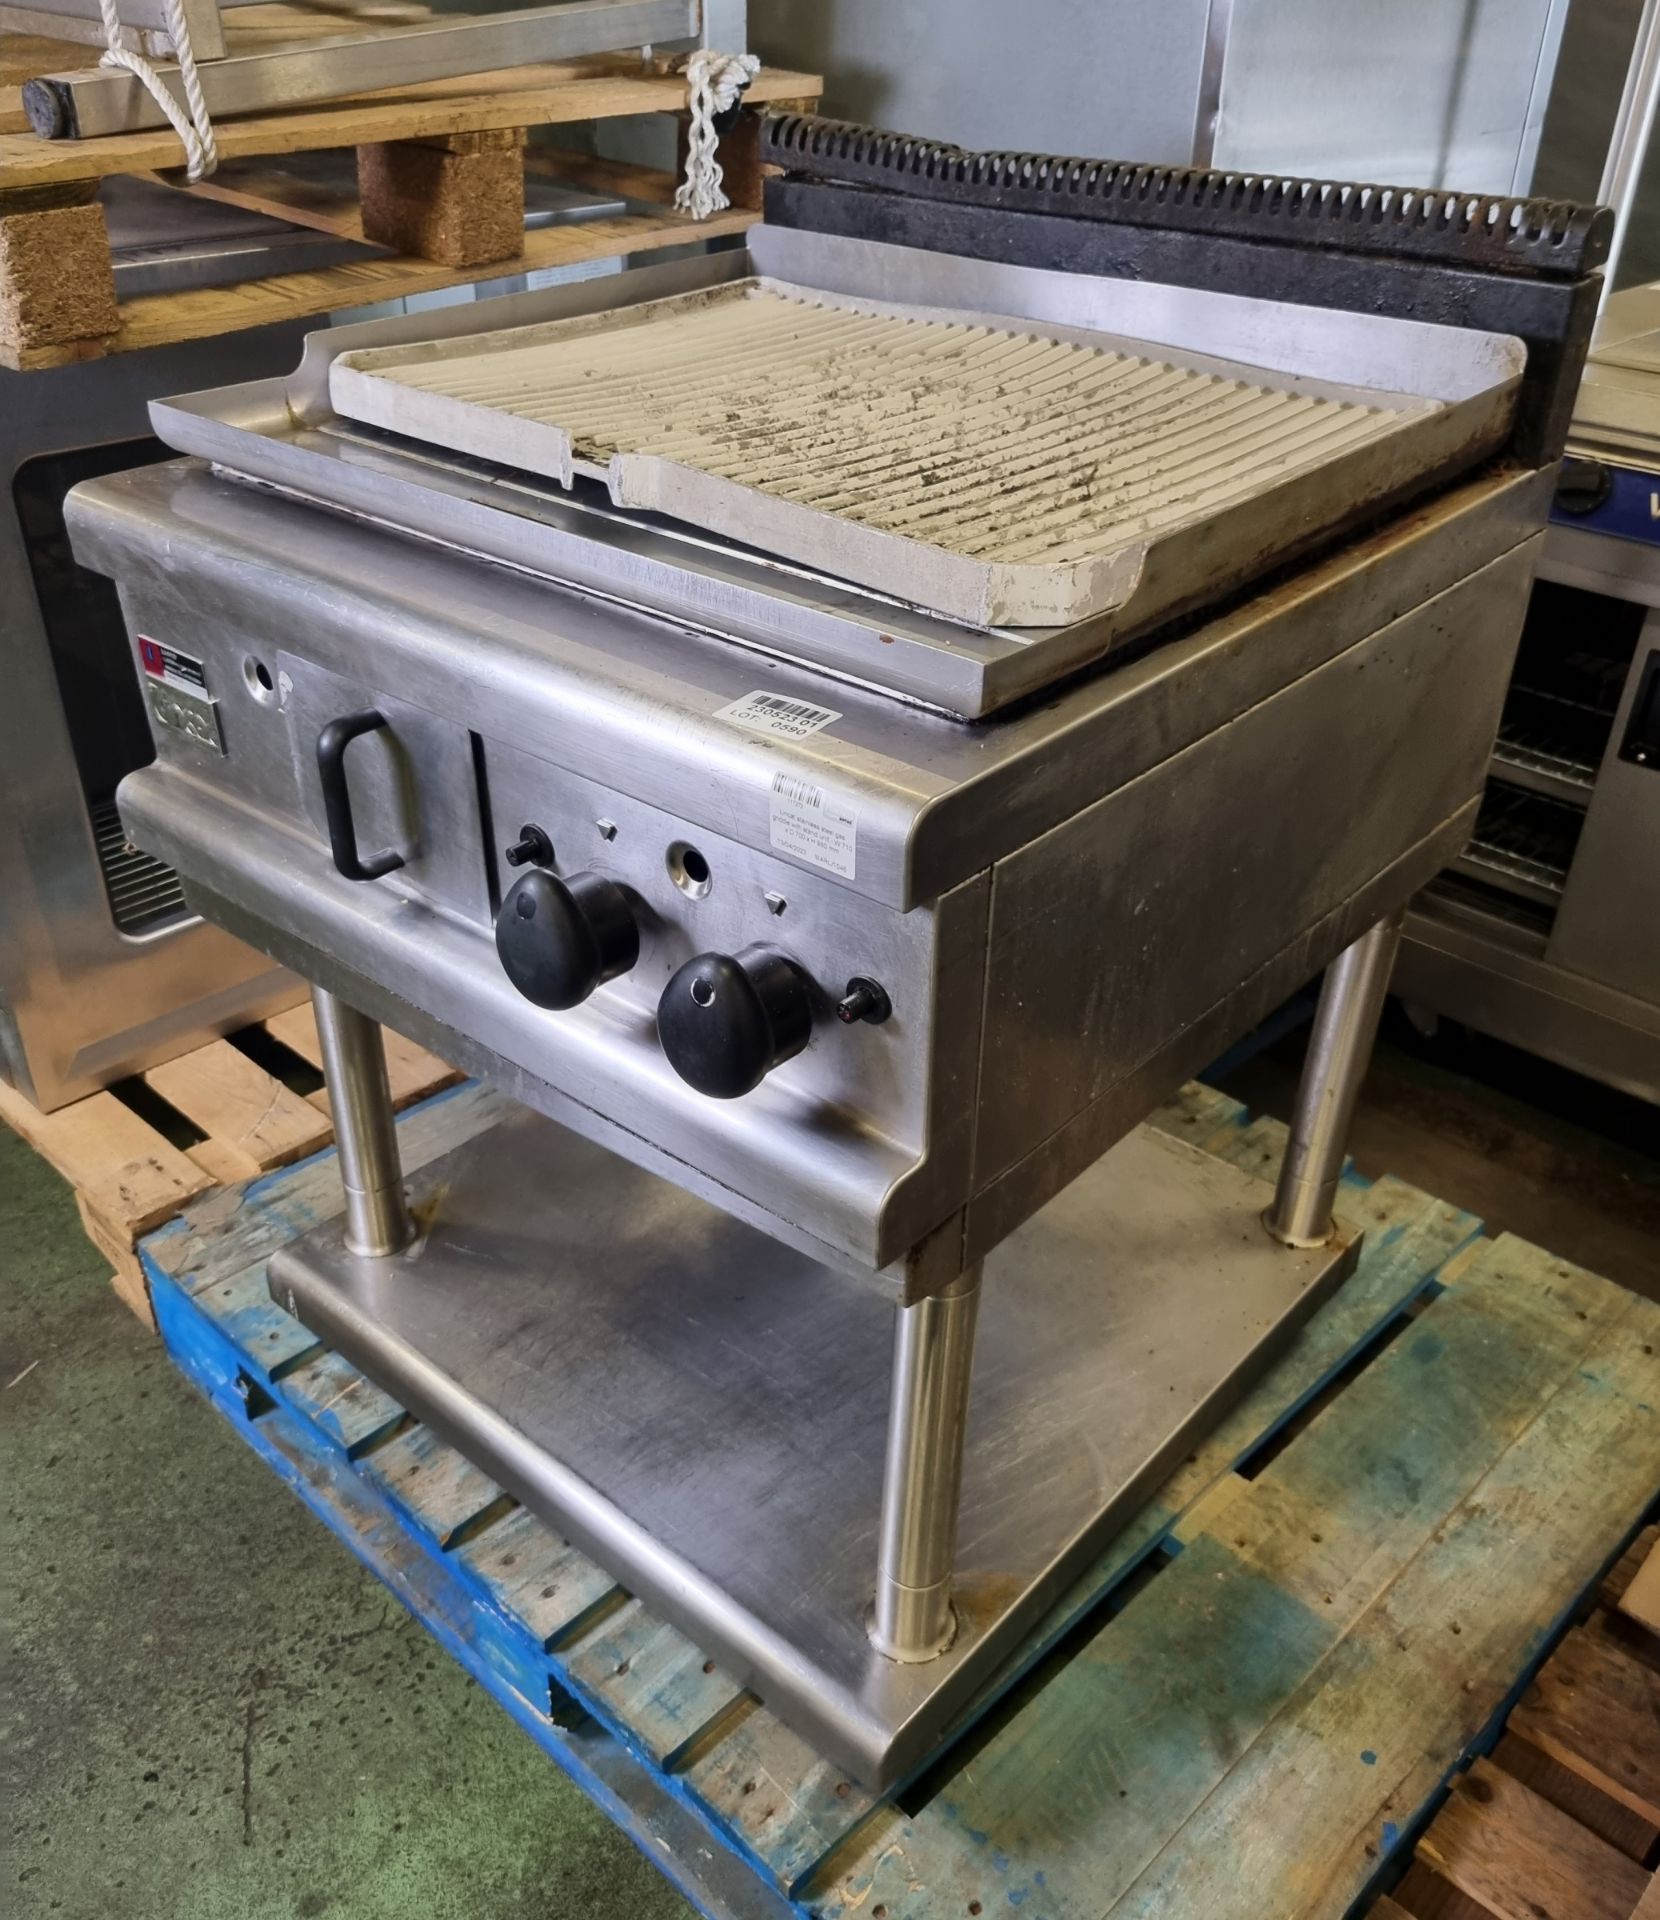 Lincat stainless steel gas griddle with stand unit - W 710 x D 700 x H 980 mm - Image 4 of 6